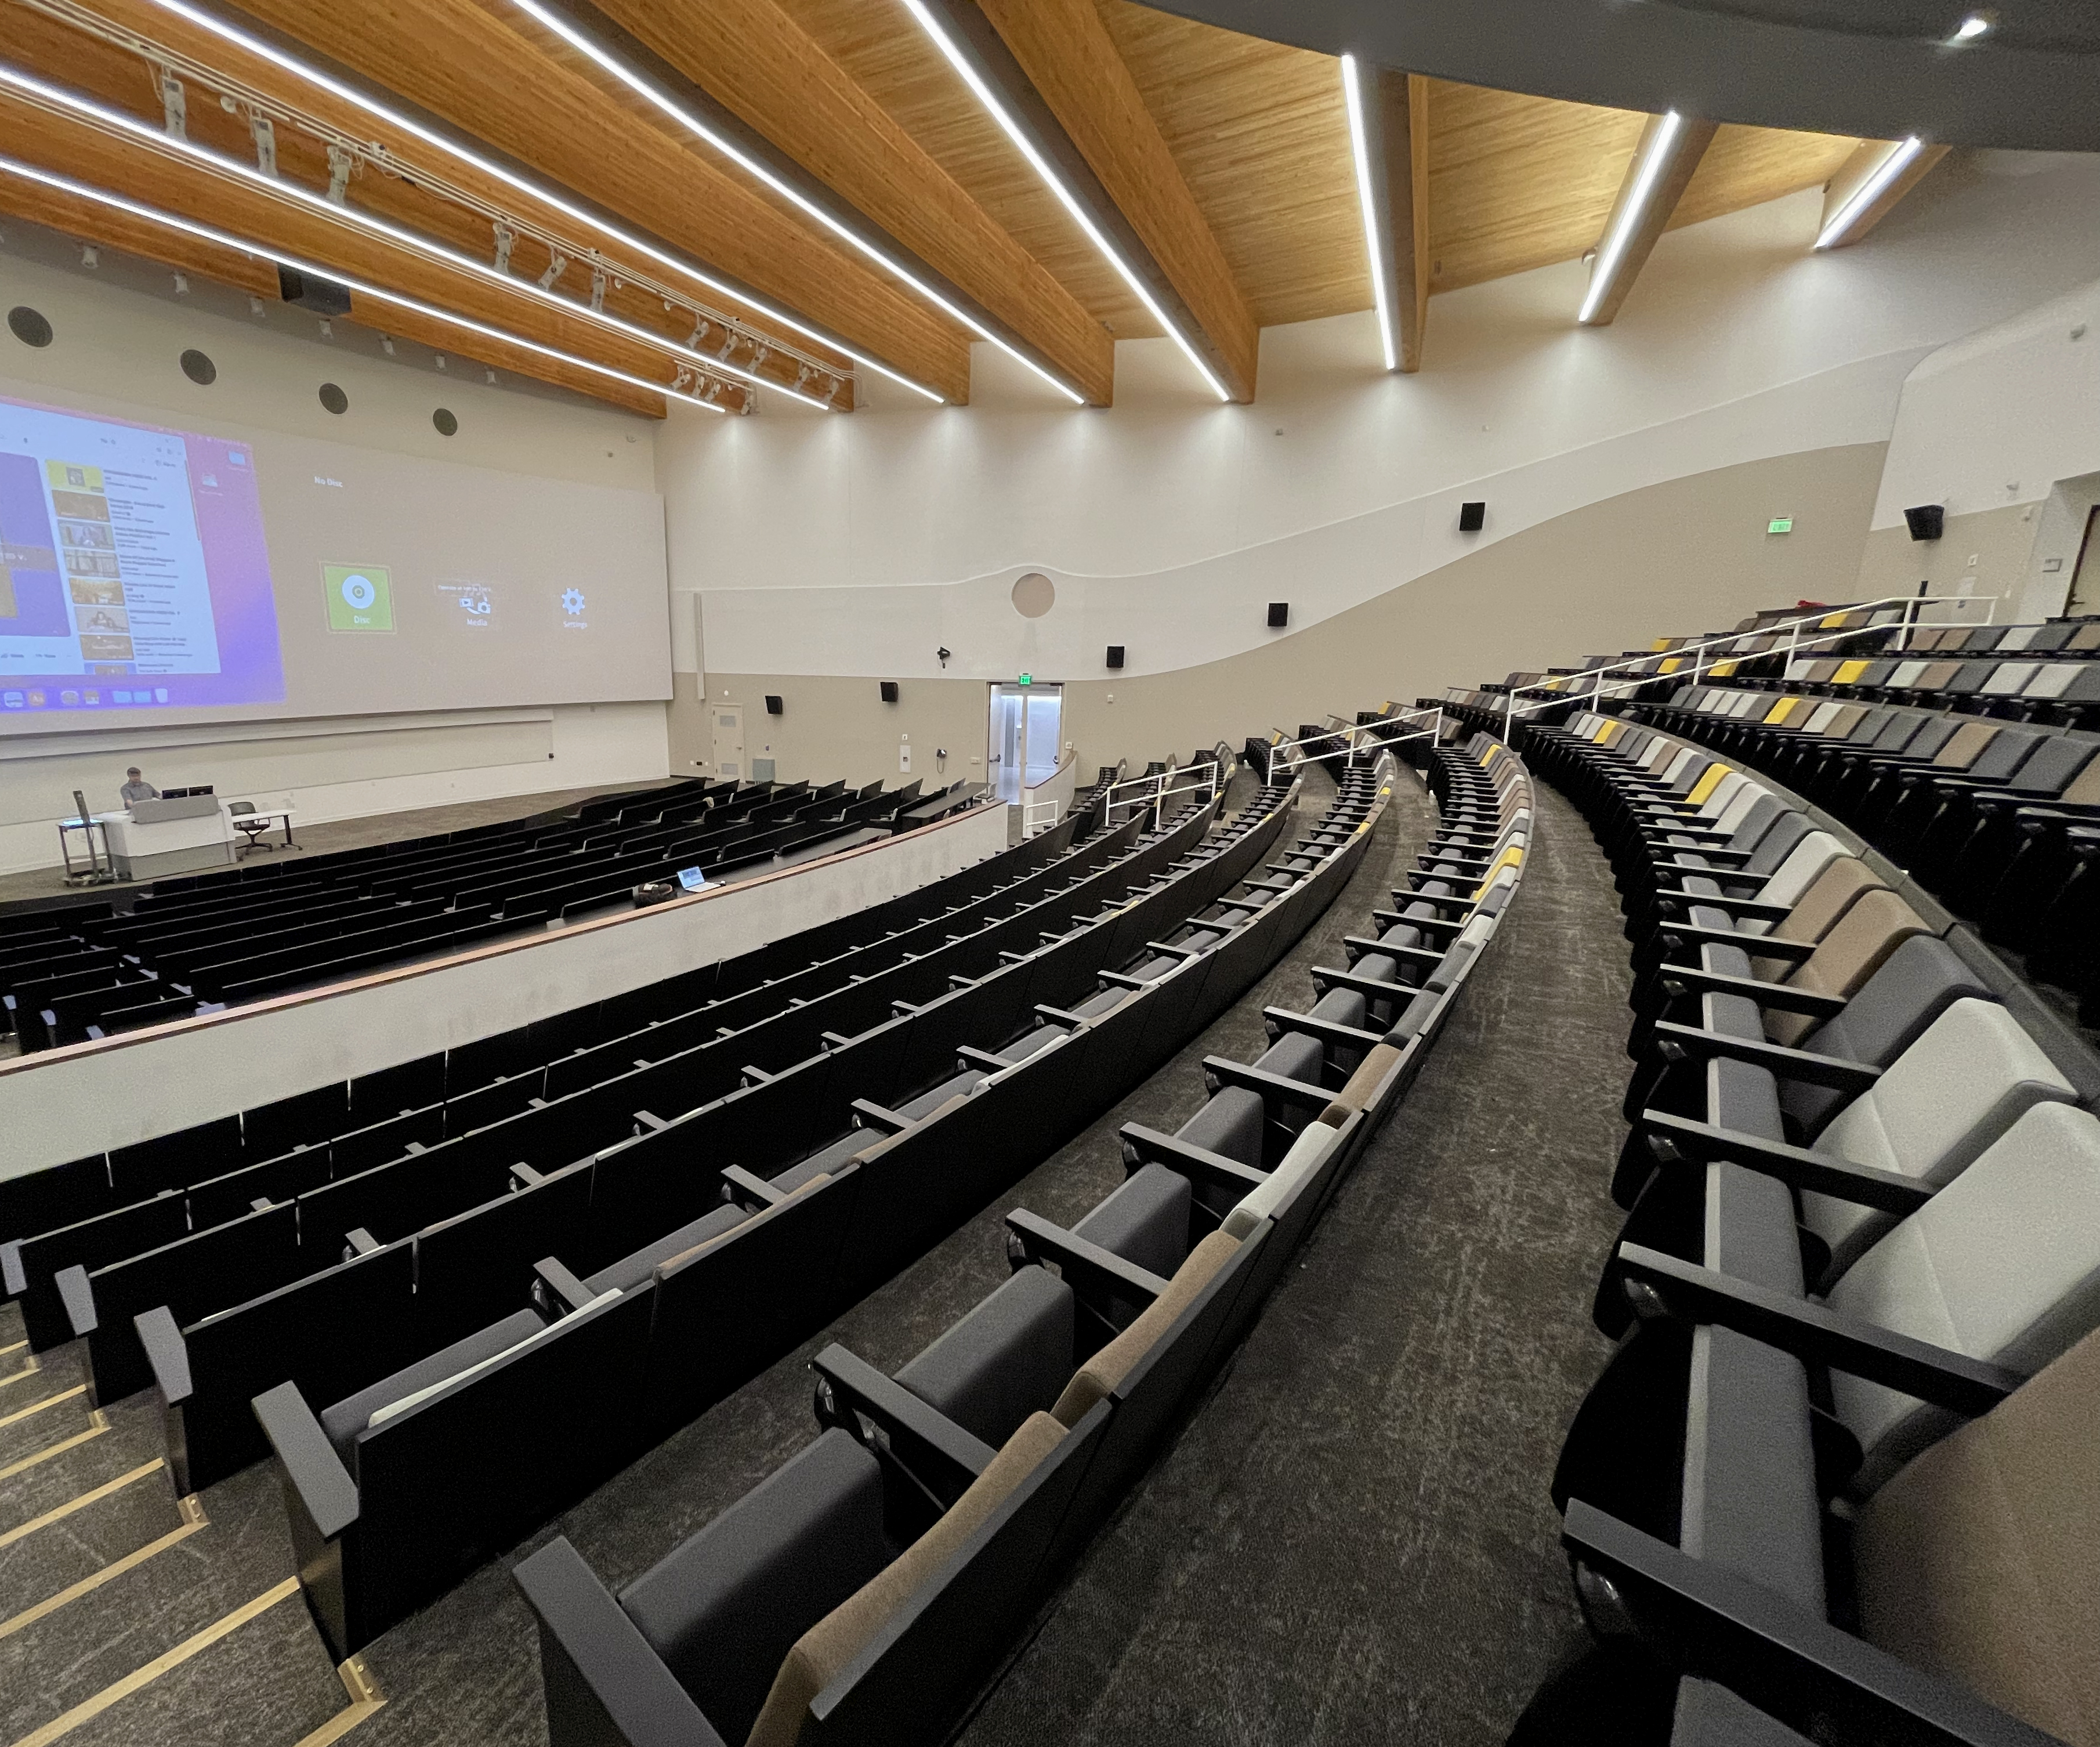 Image of the Kresge 3105 classroom from the back left corner